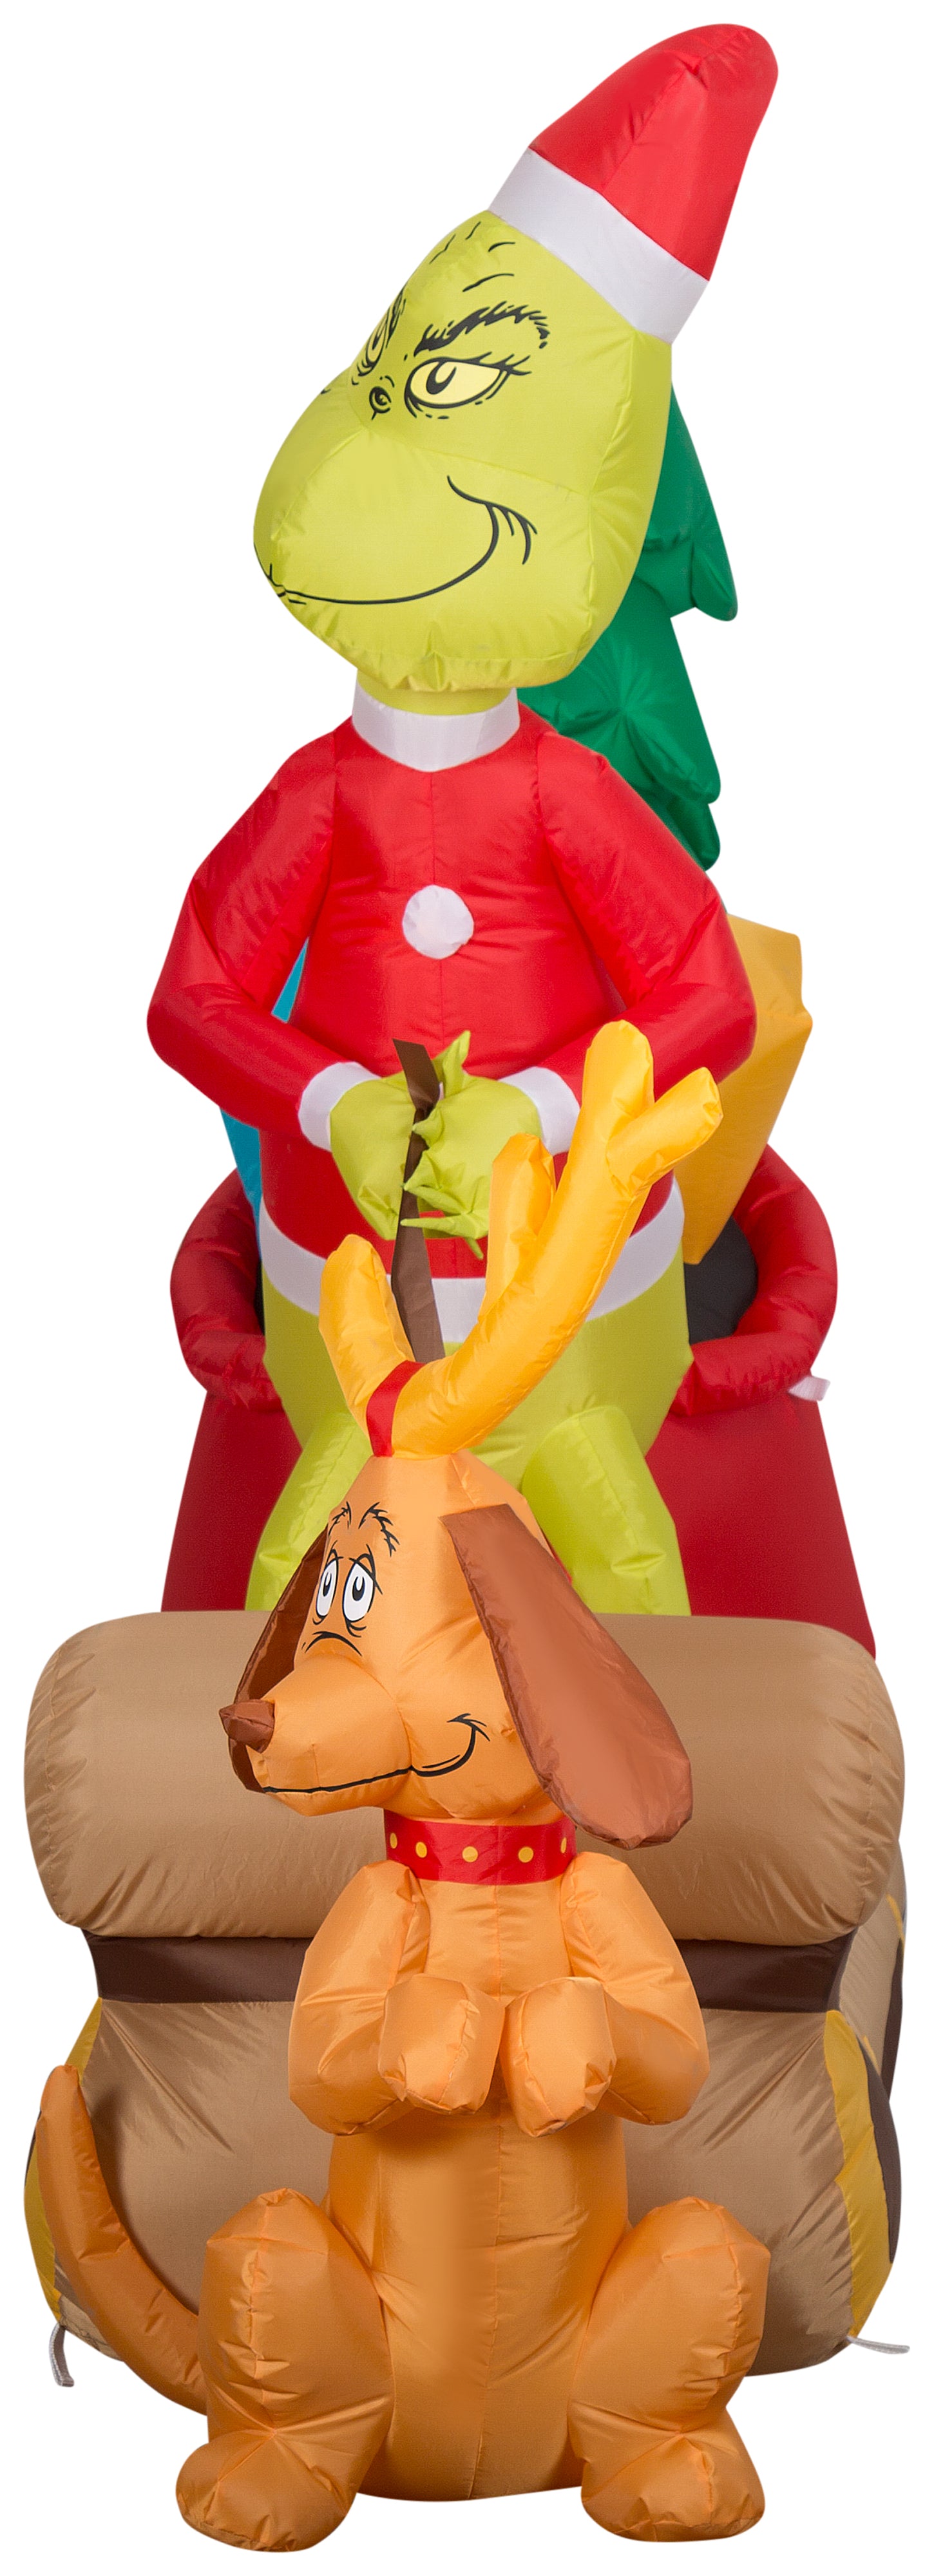 Gemmy Christmas Airblown Inflatable Grinch and Max w/Sleigh Scene Dr. Seuss, 5.5 ft Tall, Brown